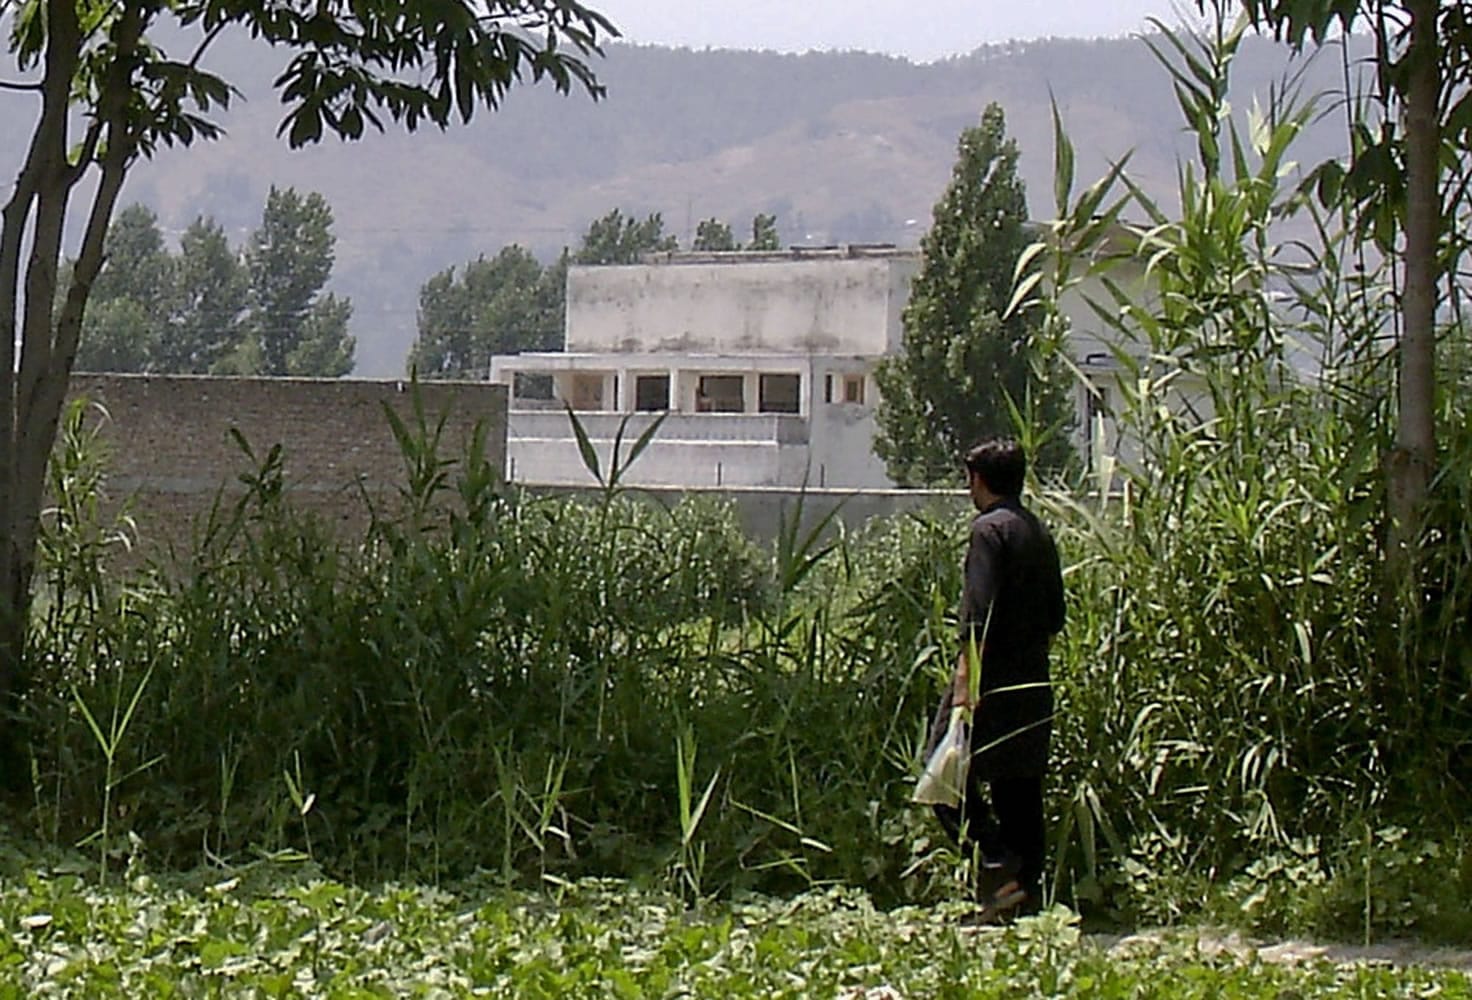 A local resident walks this month past the house  where al-Qaida leader Osama bin Laden was caught and killed in Abbottabad, Pakistan on May 2.